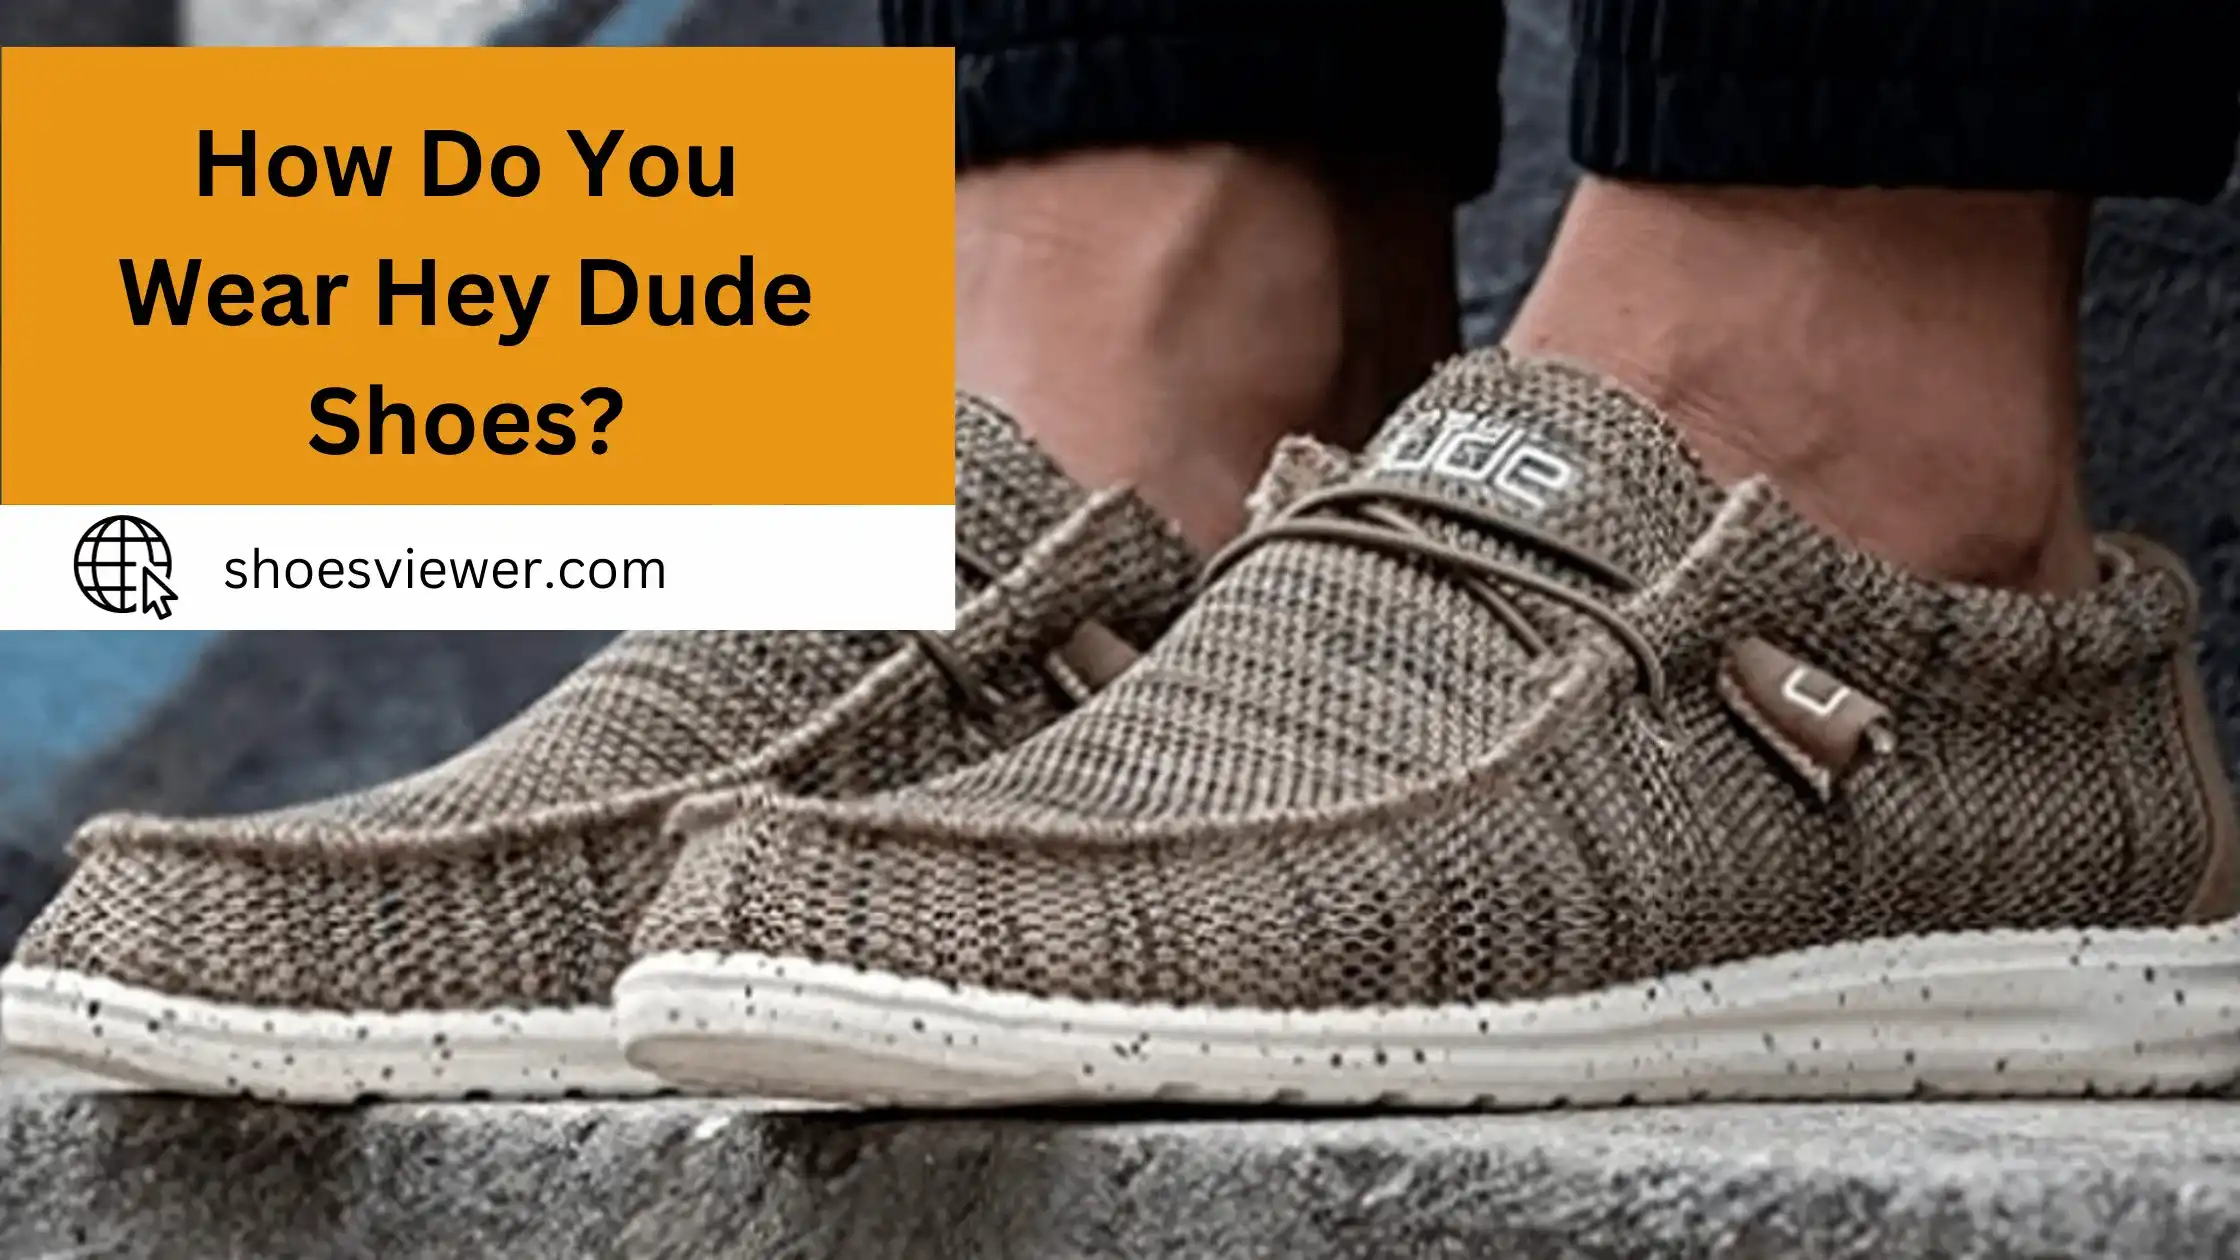 How Do You Wear Hey Dude Shoes? Expert Analysis